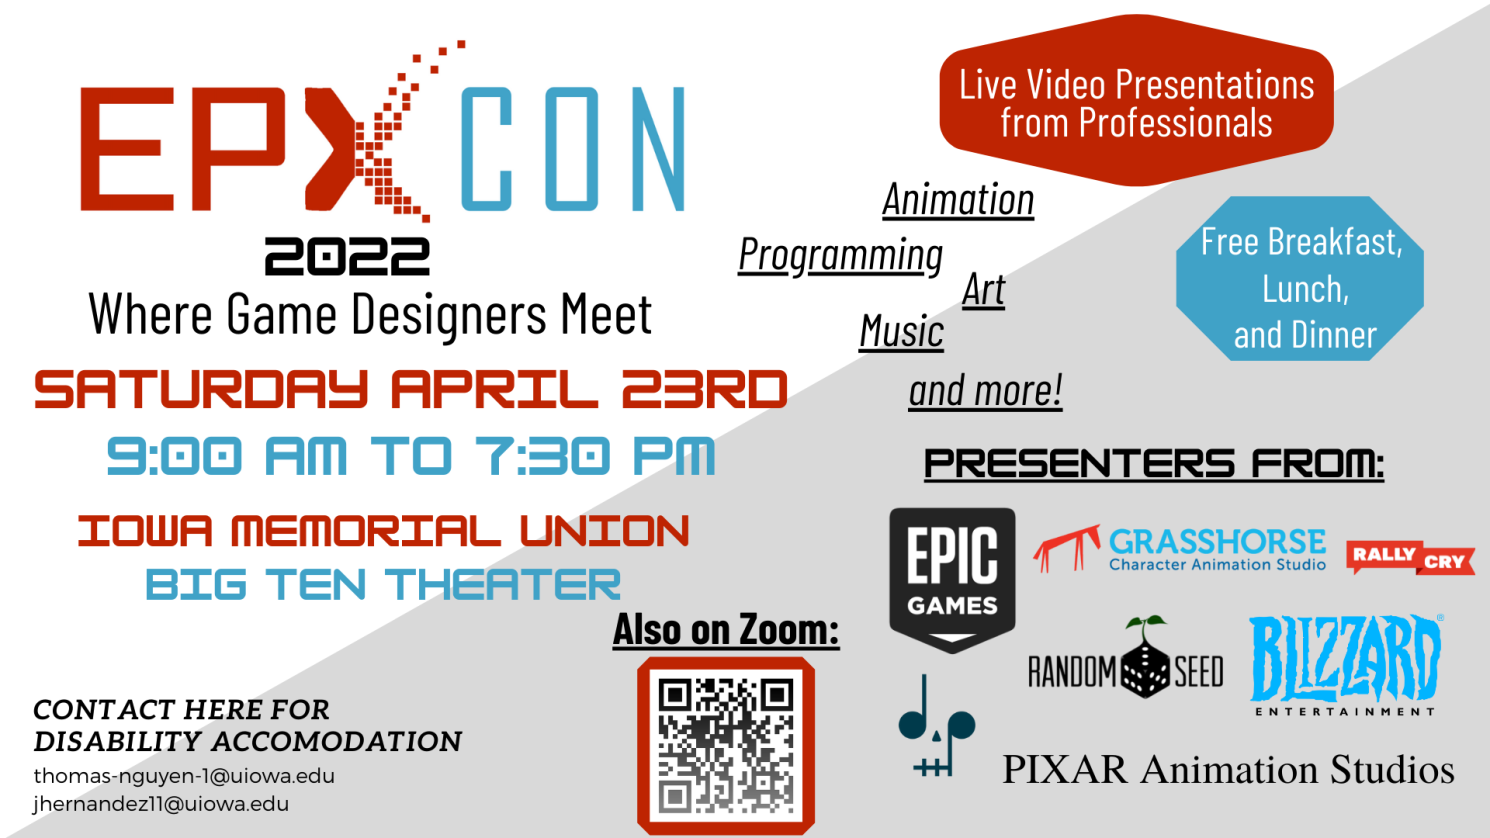 Blizzard, Epic Games, Pixar Animation Studios and more @ EPX Con 2022! Message:     When: Saturday, April 23rd 2022 (10:00 am to 7:30 pm) What: EPX Con is an animation and gaming conference that will be held Saturday, April 23rd at the University of Iowa in Iowa City.  We will be virtually hosting a variety of speakers from companies like Blizzard Entertainment, Epic Games, Pixar Animation Studios, RallyCry, among others, to present on topics like game development, animation, art, filmmaking, music composition, and eSports. We will be having lectures, workshops, Q&A sessions, and more! Where: Iowa Memorial Union, Big Ten Theater (125 N Madison St, Iowa City, IA 52245) and Online via Zoom.   Free & Open to Public   Zoom Meeting Link: https://uiowa.zoom.us/j/95604139922 